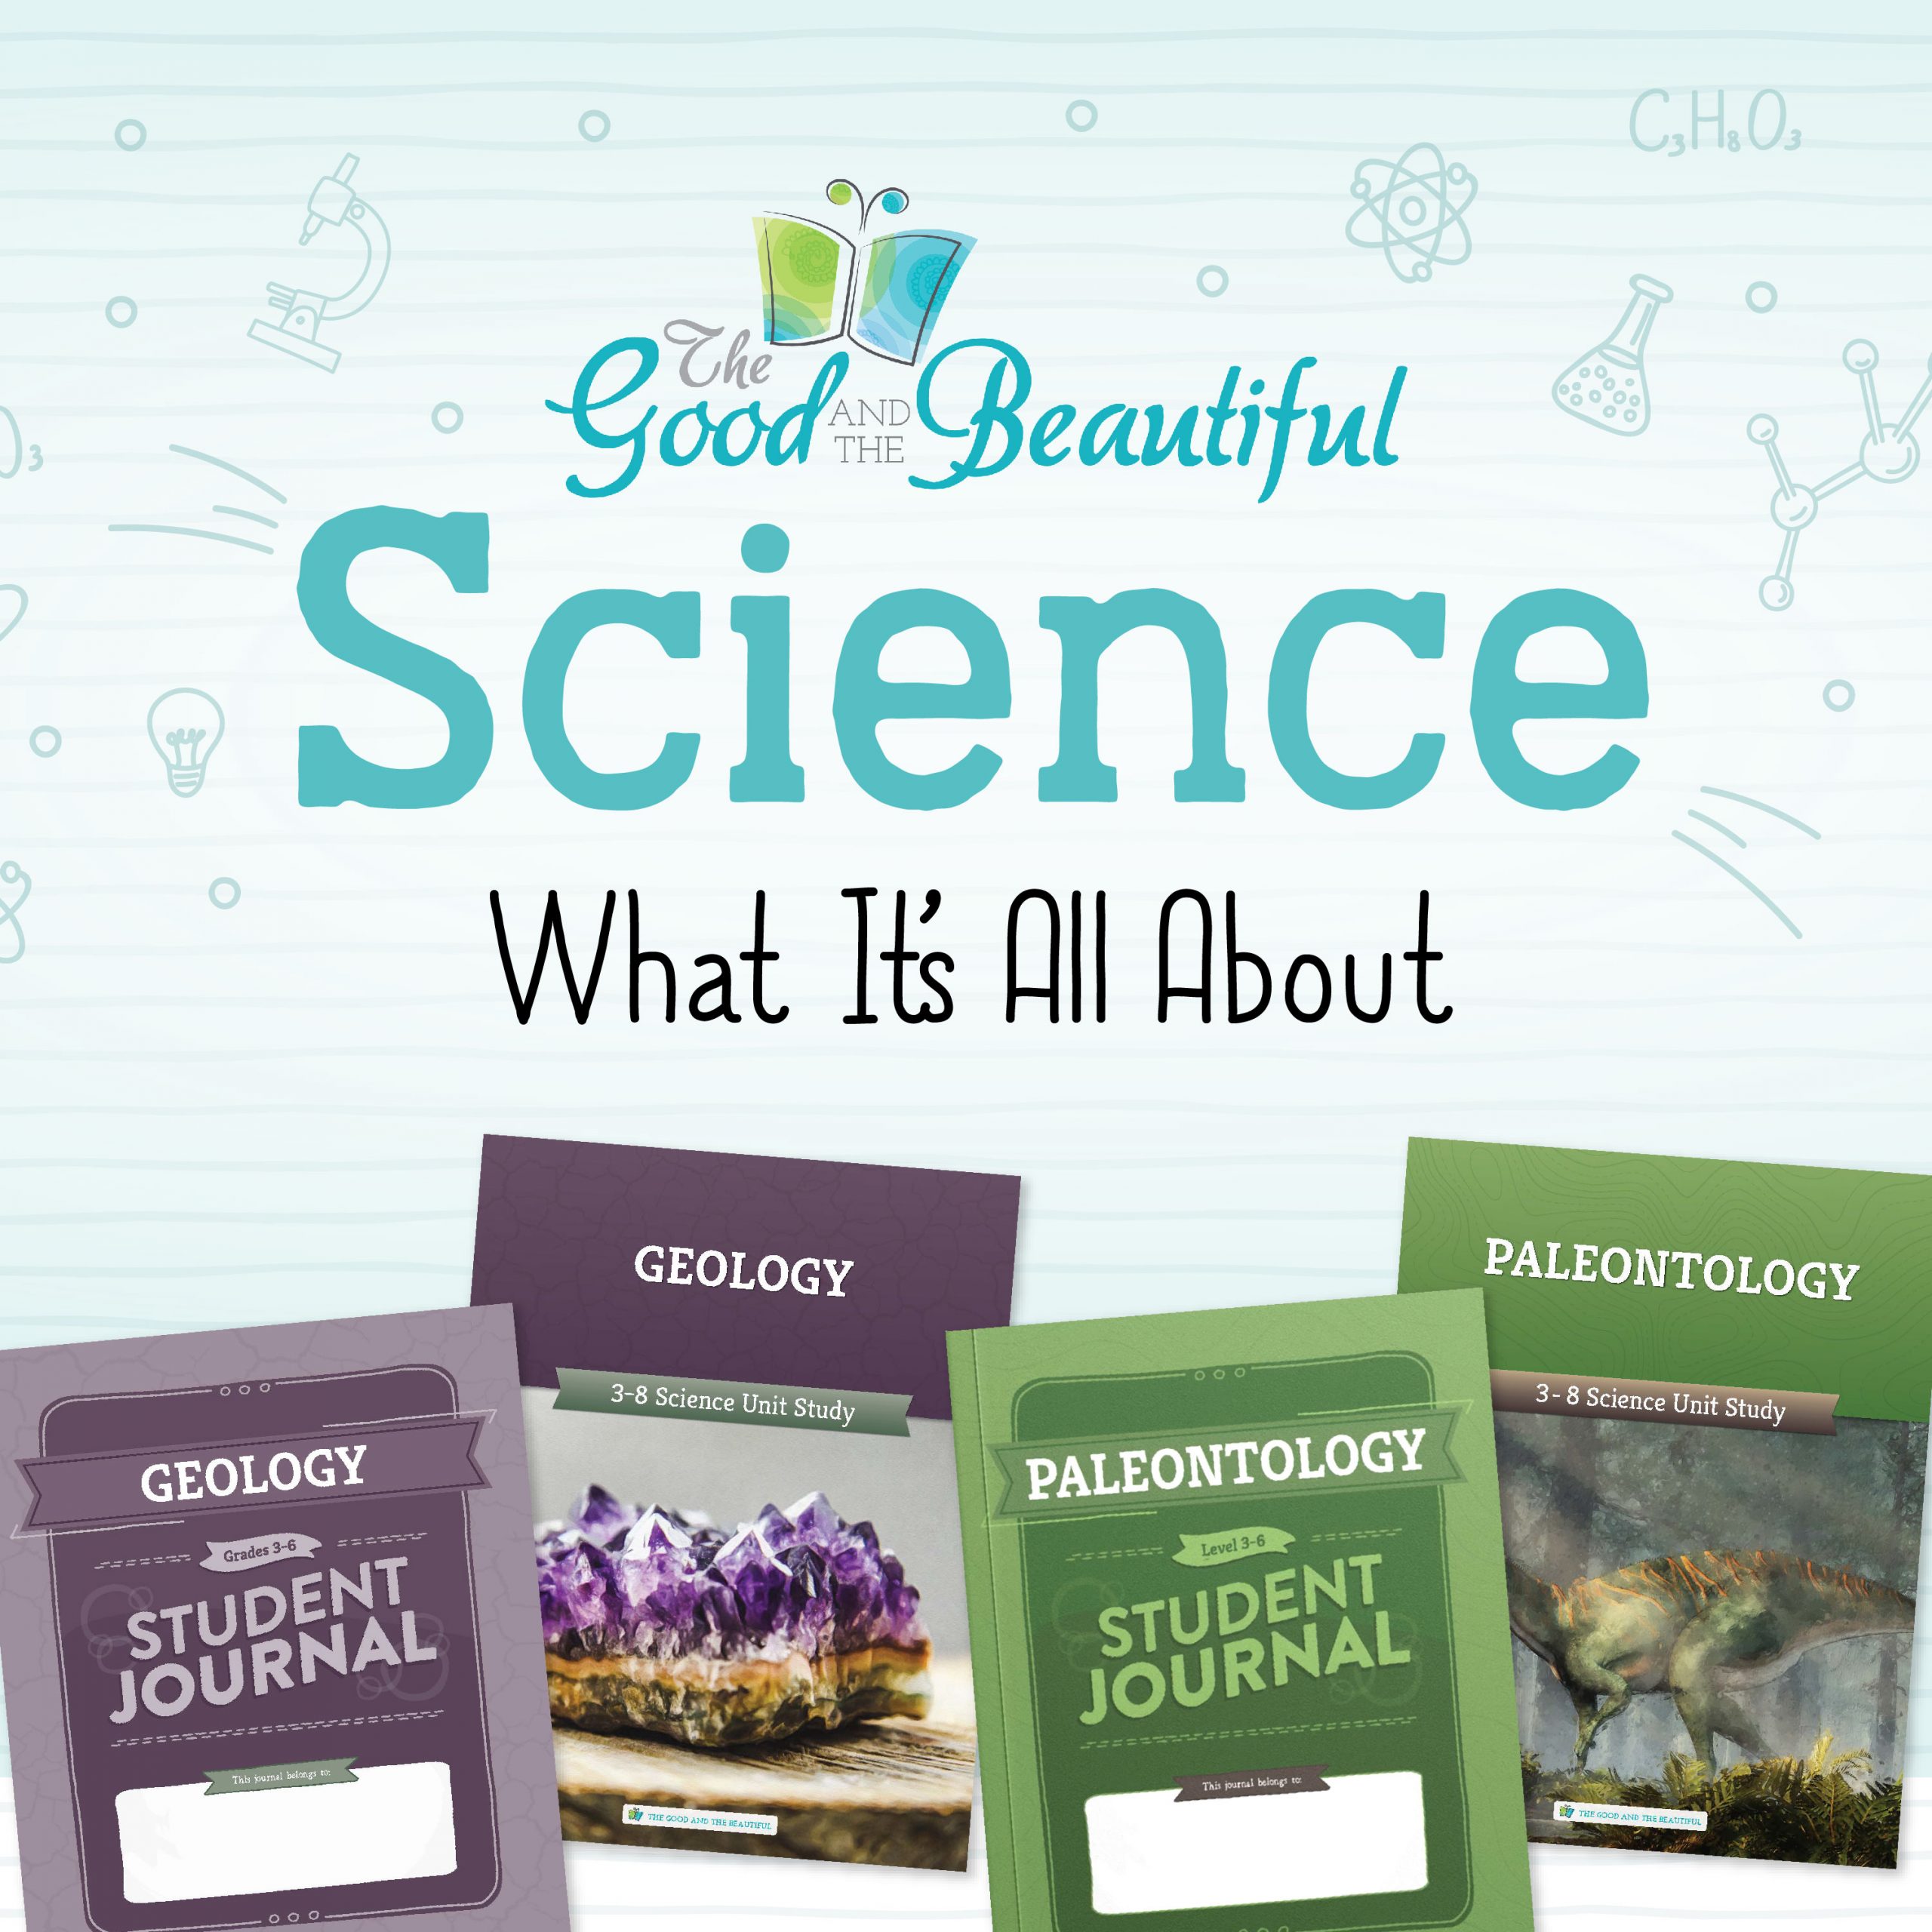 Science What It's All About from The Good and the Beautiful